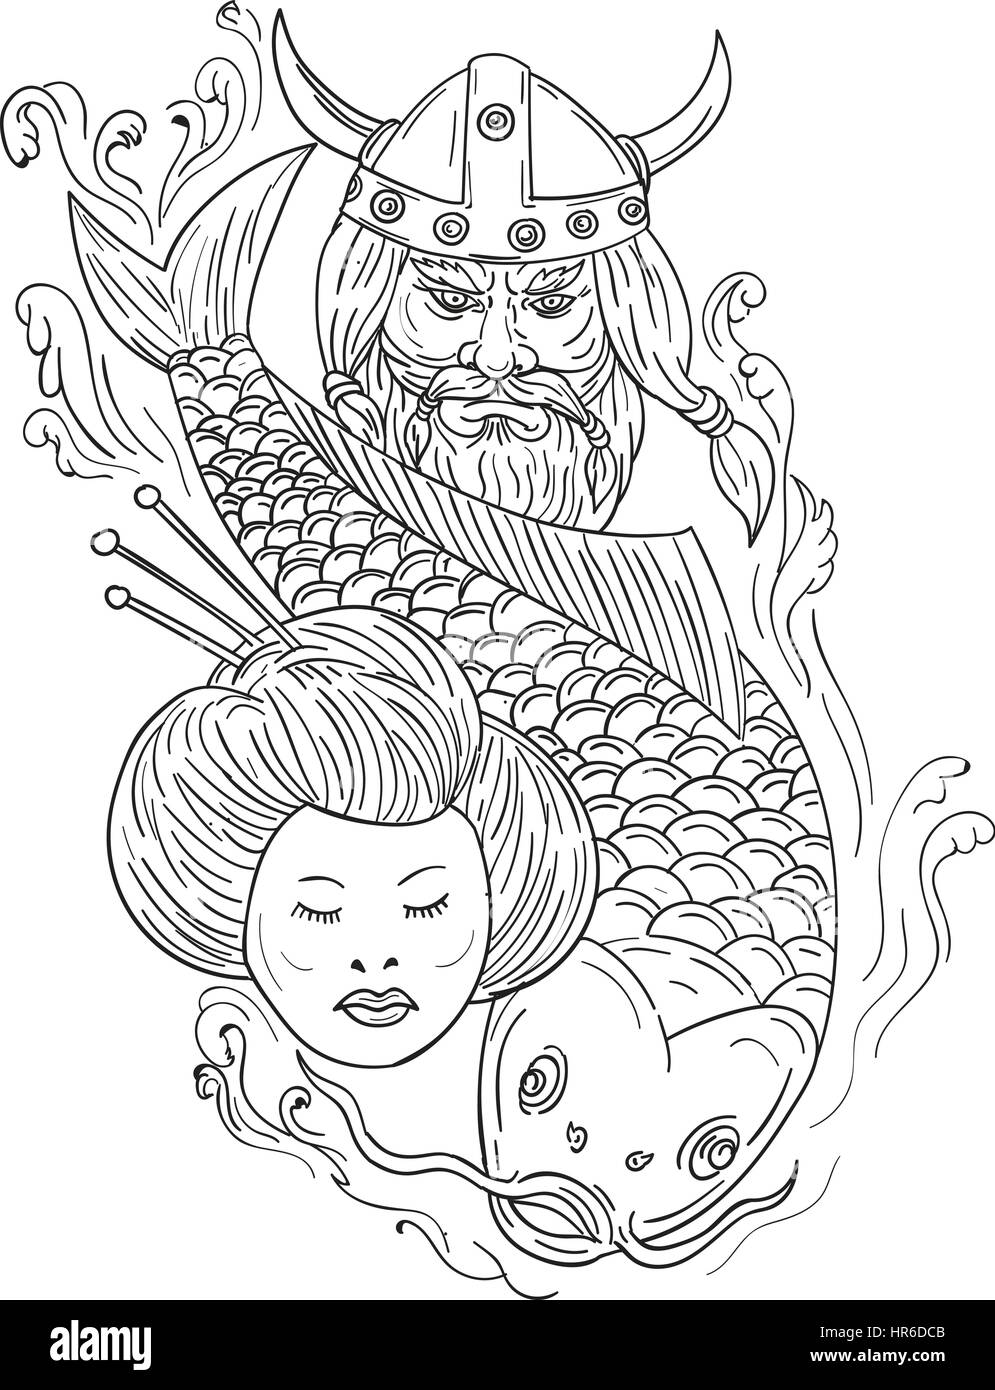 Drawing sketch style illustration of a head of a norseman viking warrior raider barbarian wearing horned helmet with beard, koi carp fish diving and g Stock Vector